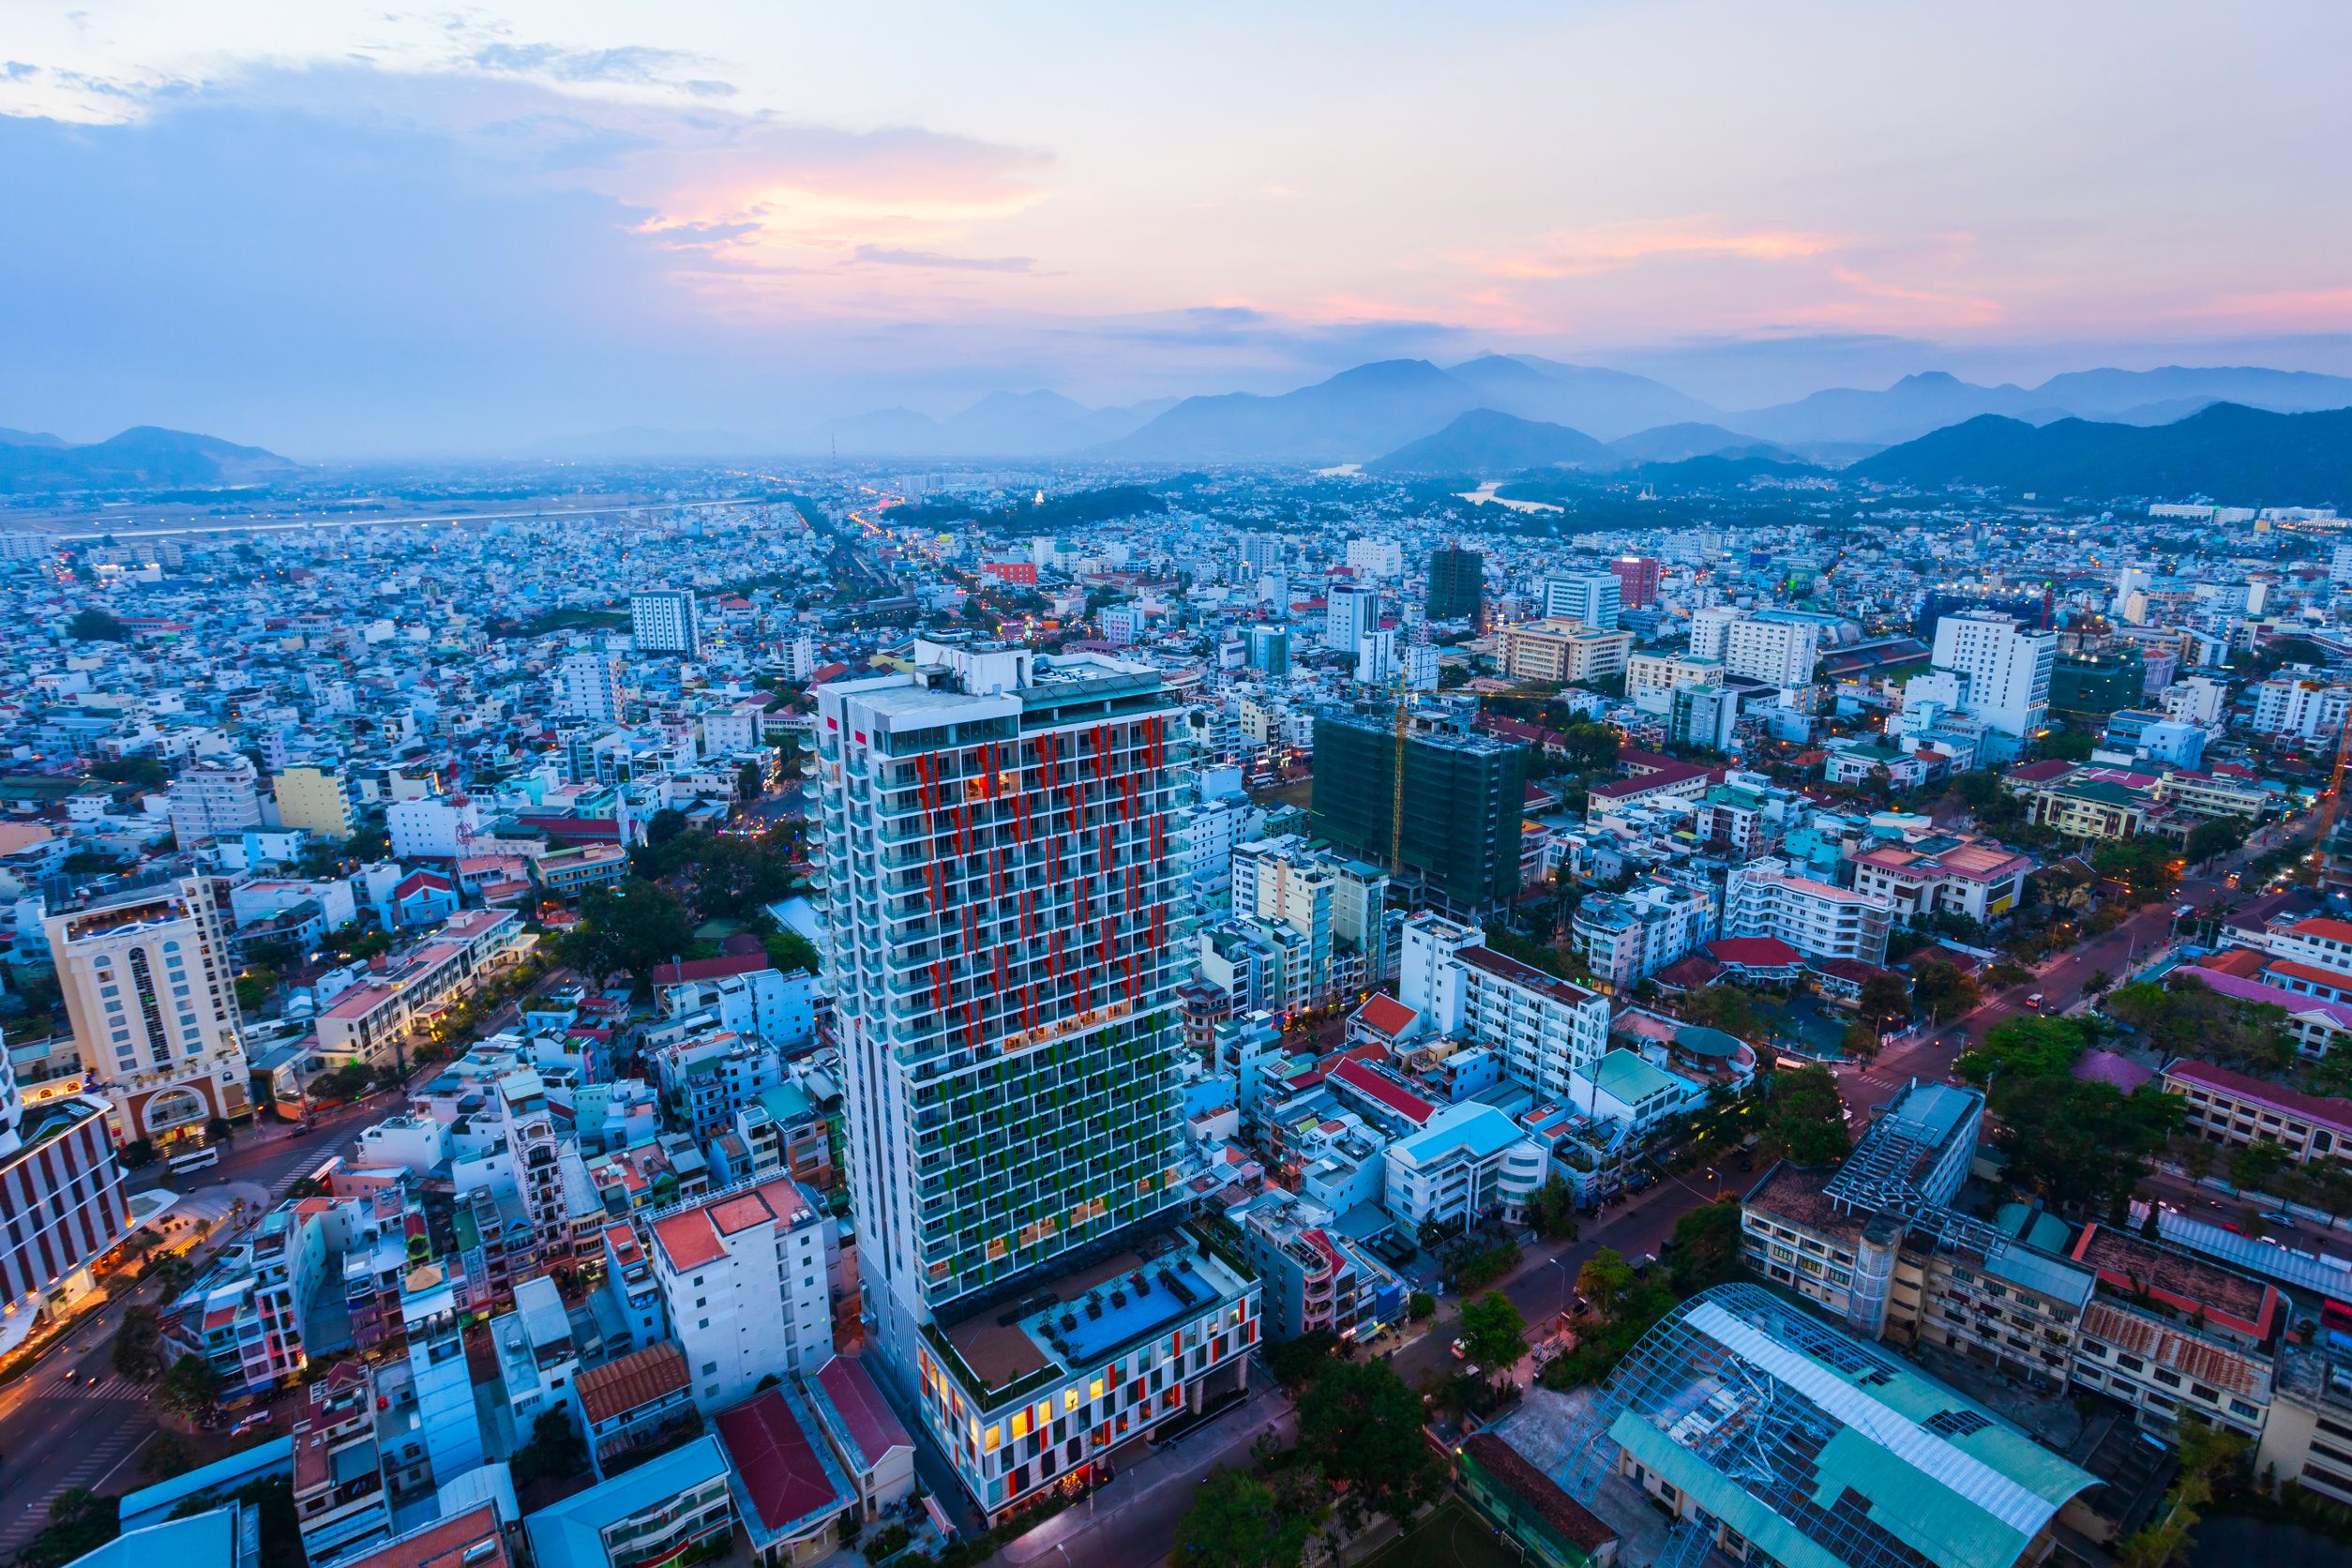 These are the most active investors in Vietnam’s startups